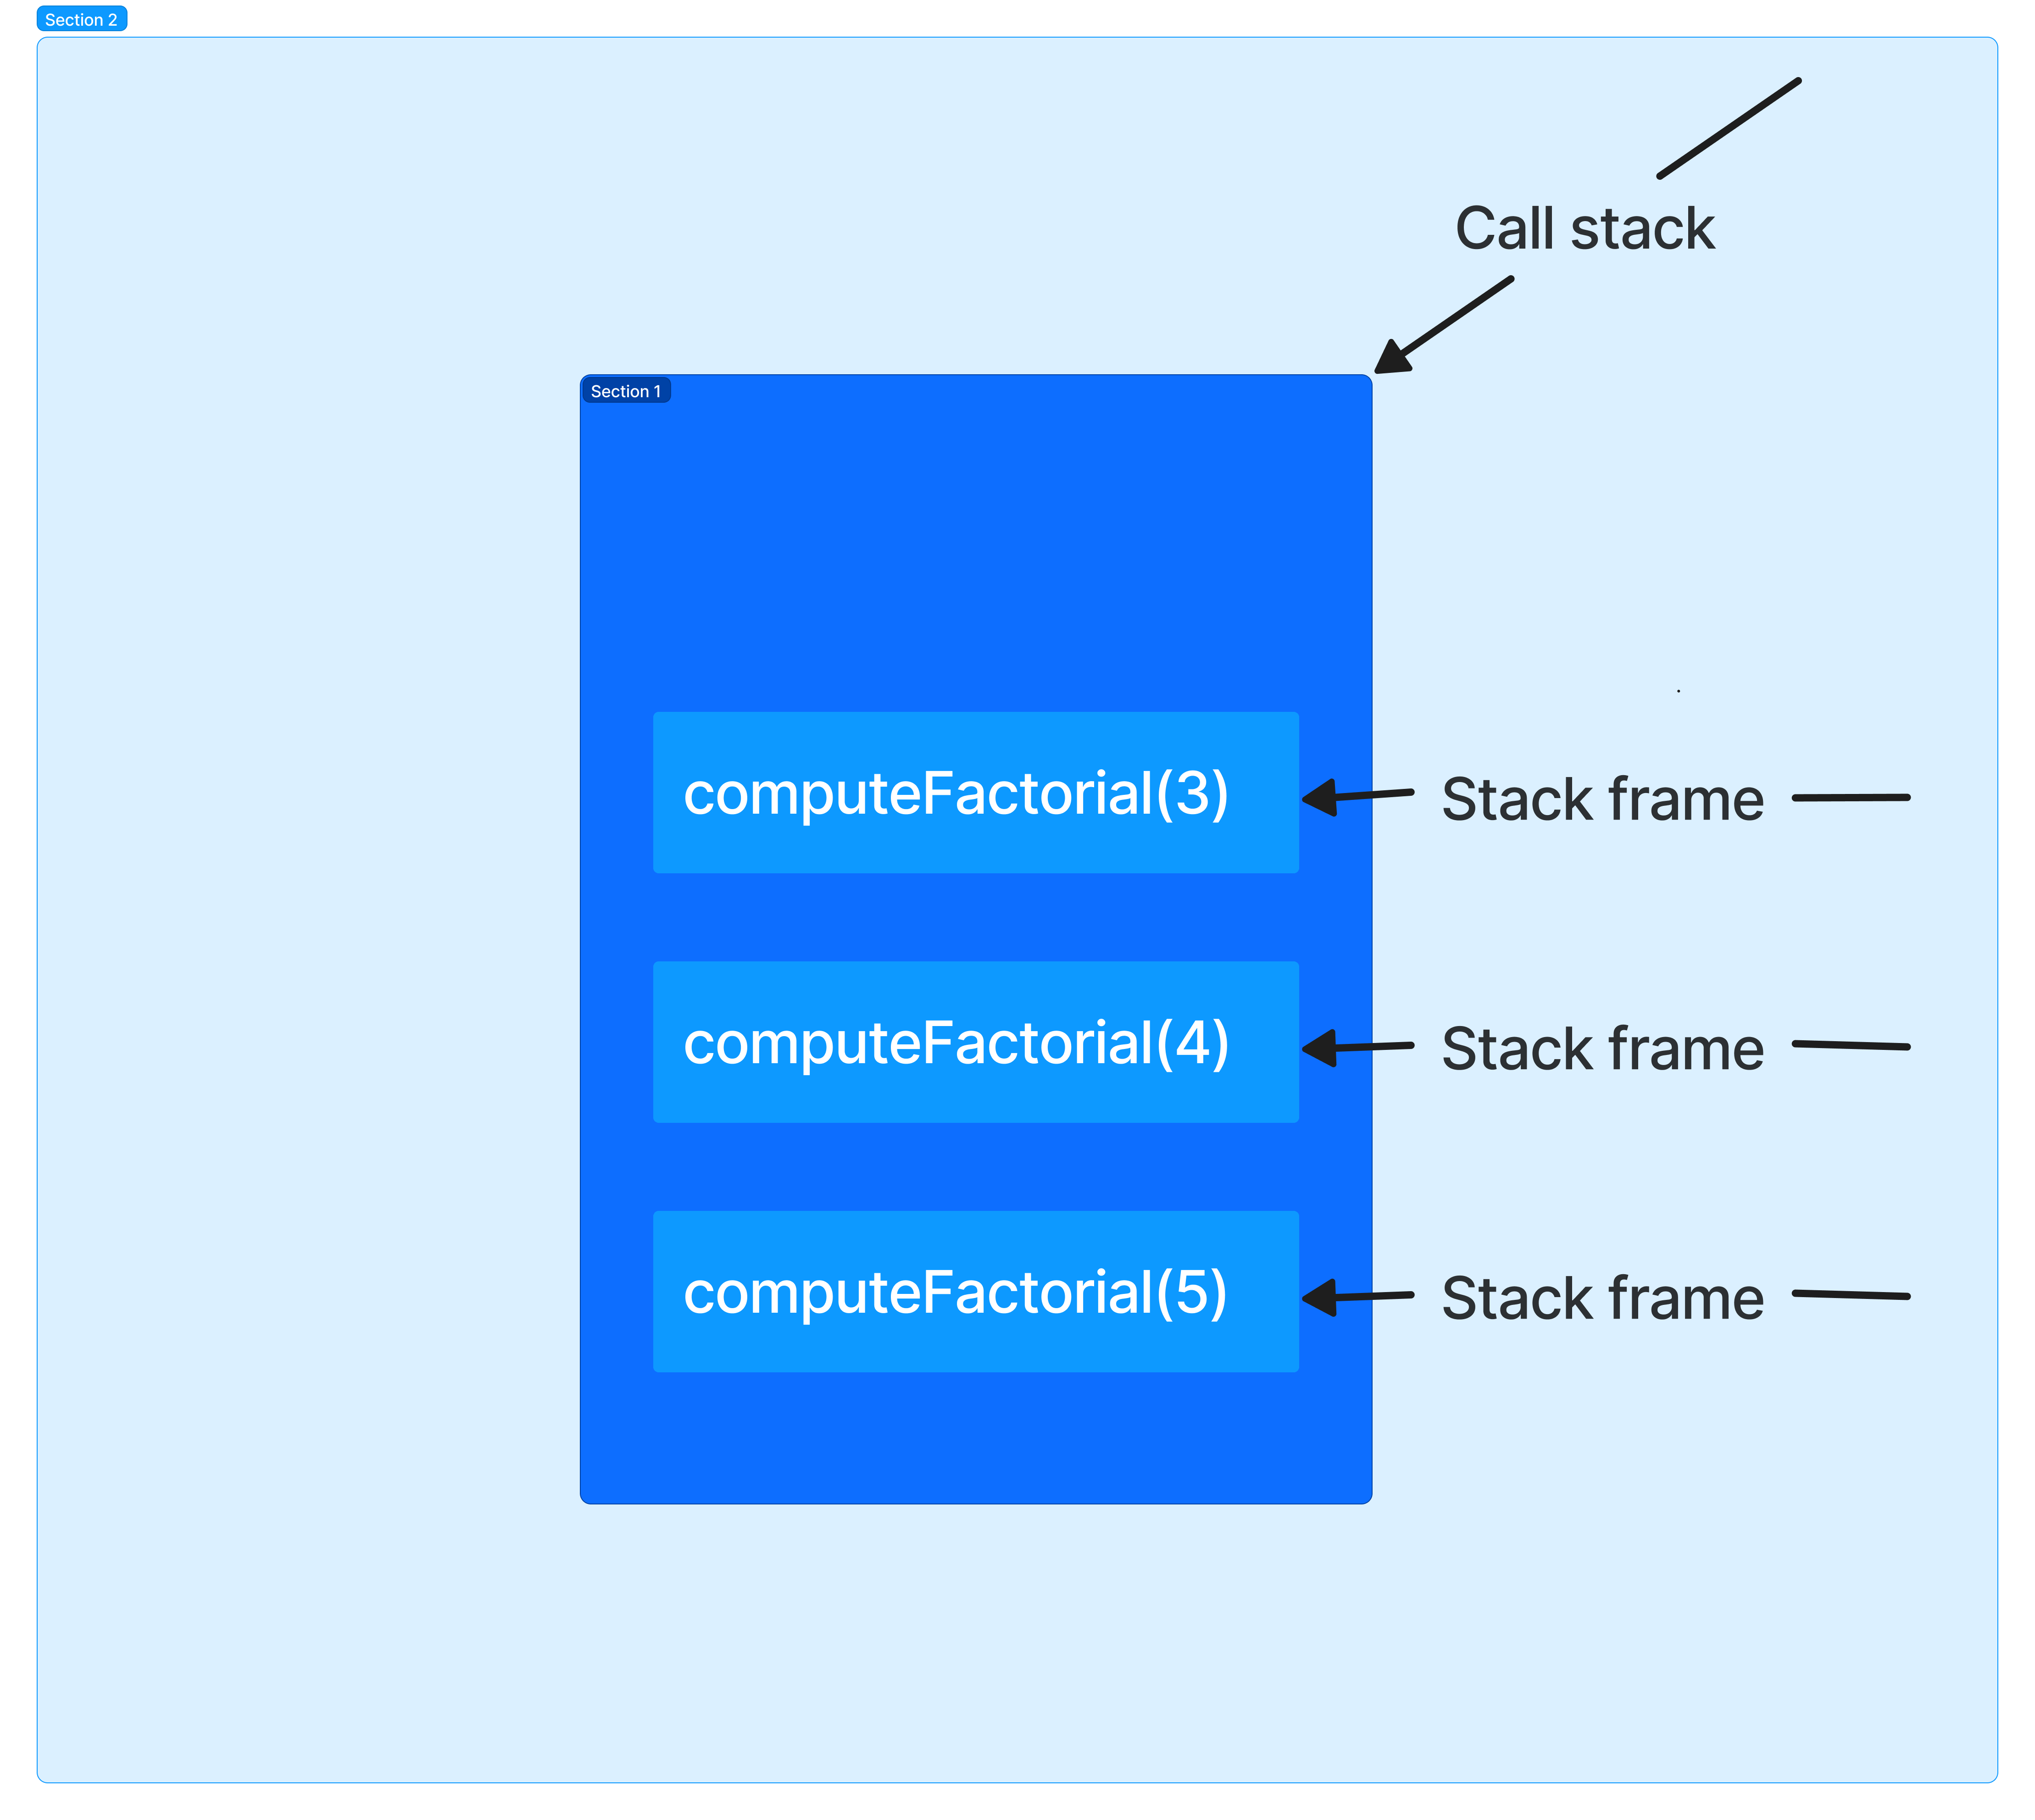  Illustration of a call stack and stack frames